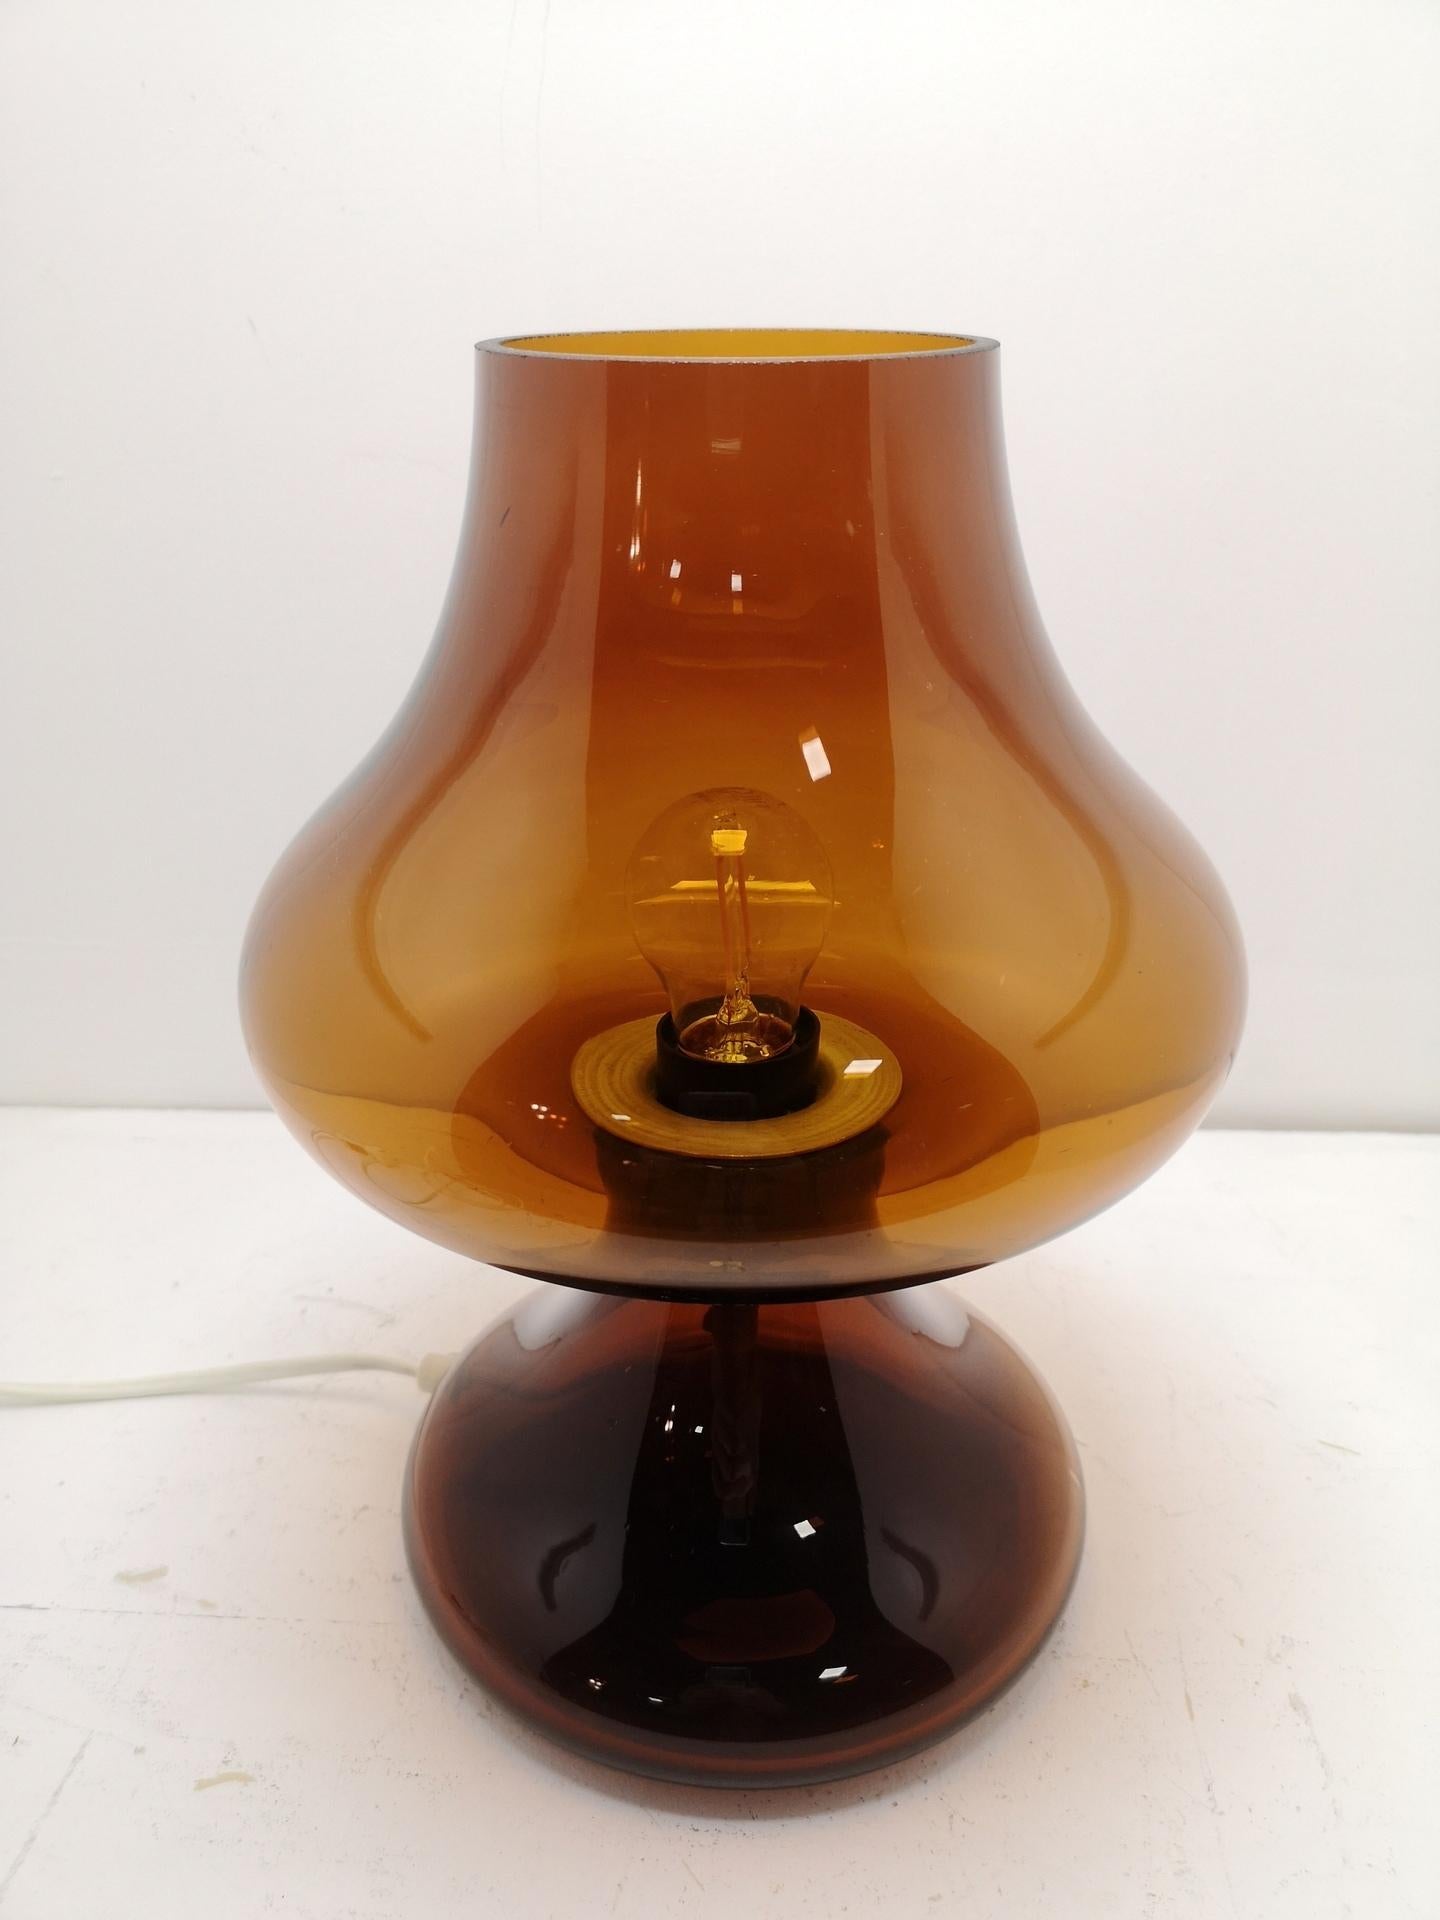 Vintage amber glass lamp: a blown, hand made glass lamp, of one solid piece of glass from the 1970s, in amber or dark honey color. Rare, vintage piece.